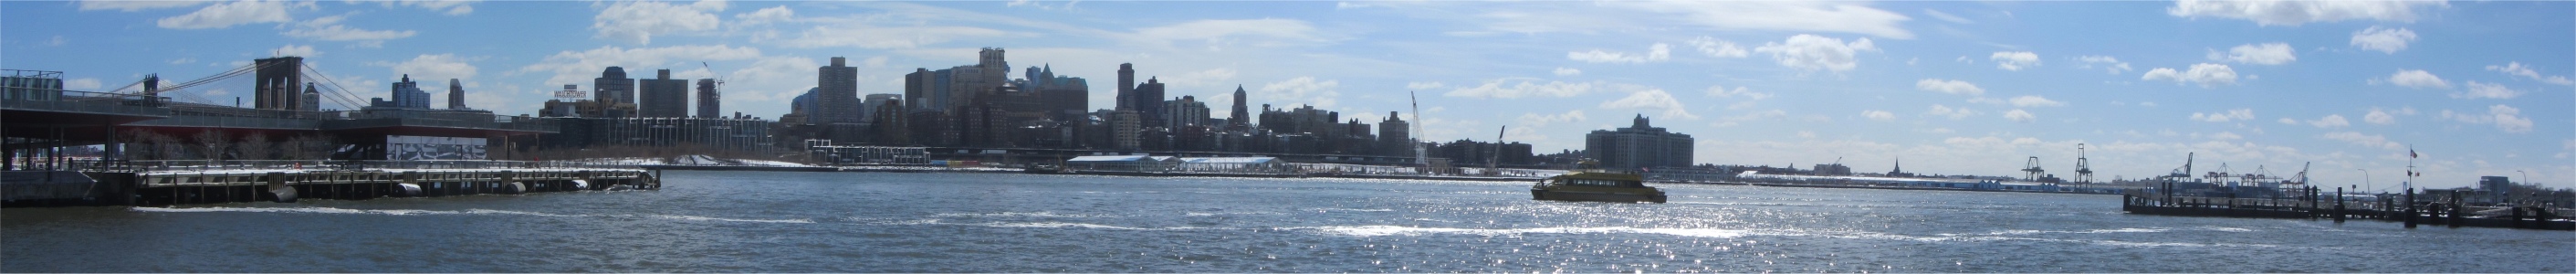 brooklyn_from_seaport